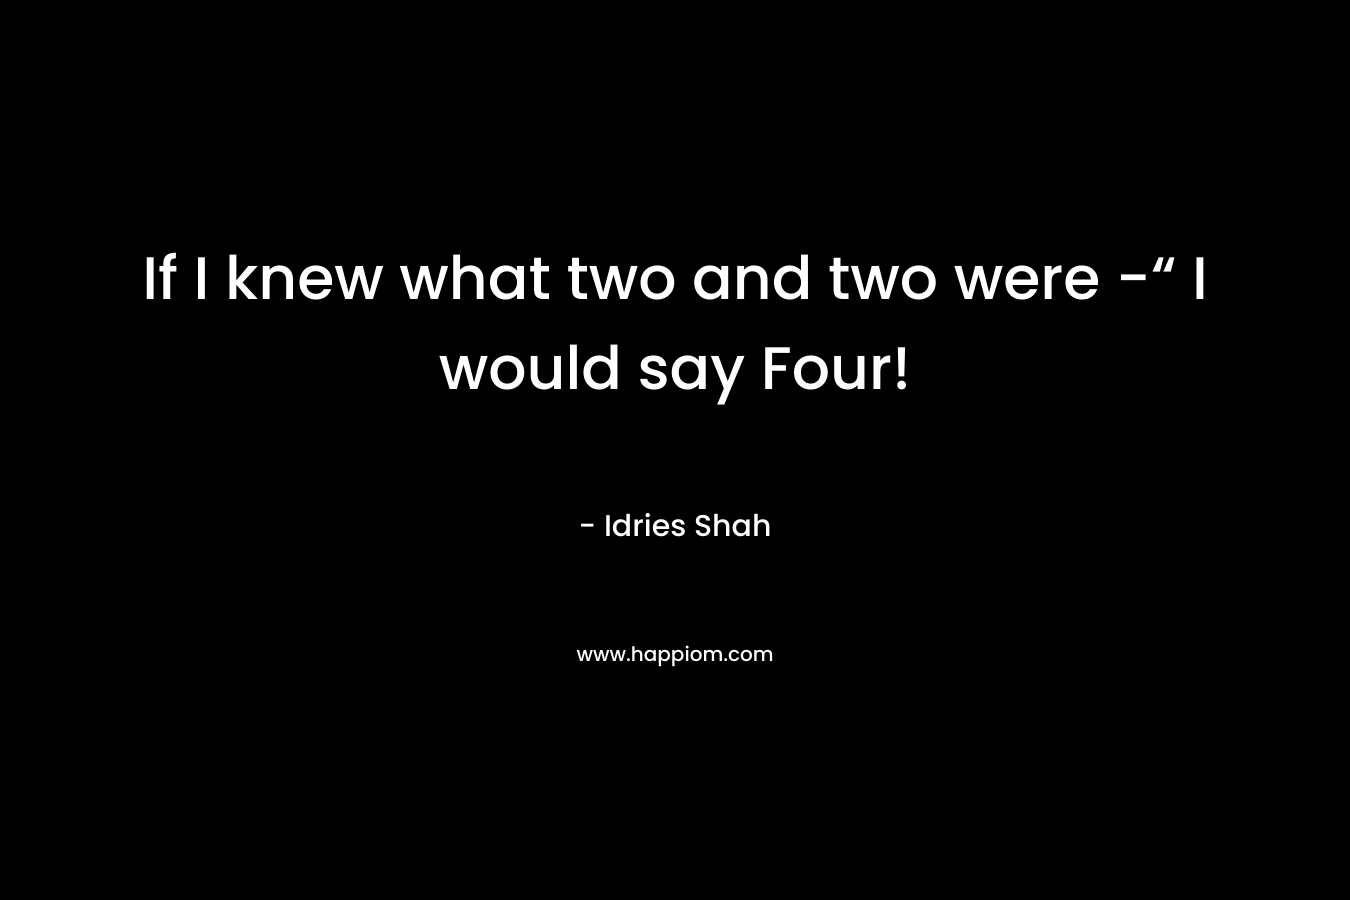 If I knew what two and two were -“ I would say Four!